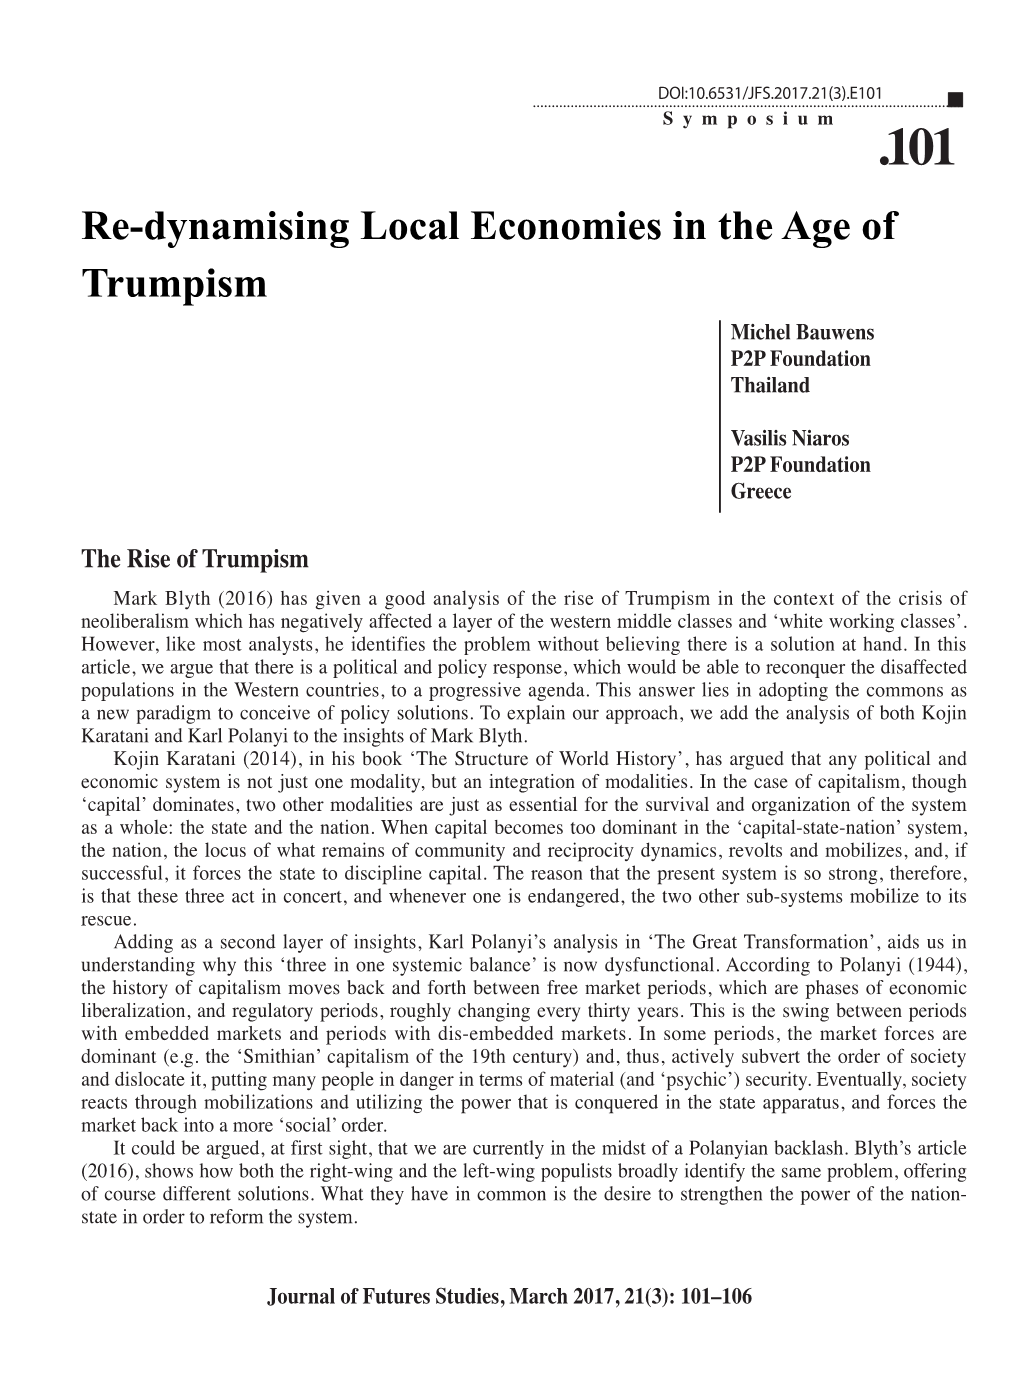 Re-Dynamising Local Economies in the Age of Trumpism Michel Bauwens P2P Foundation Thailand